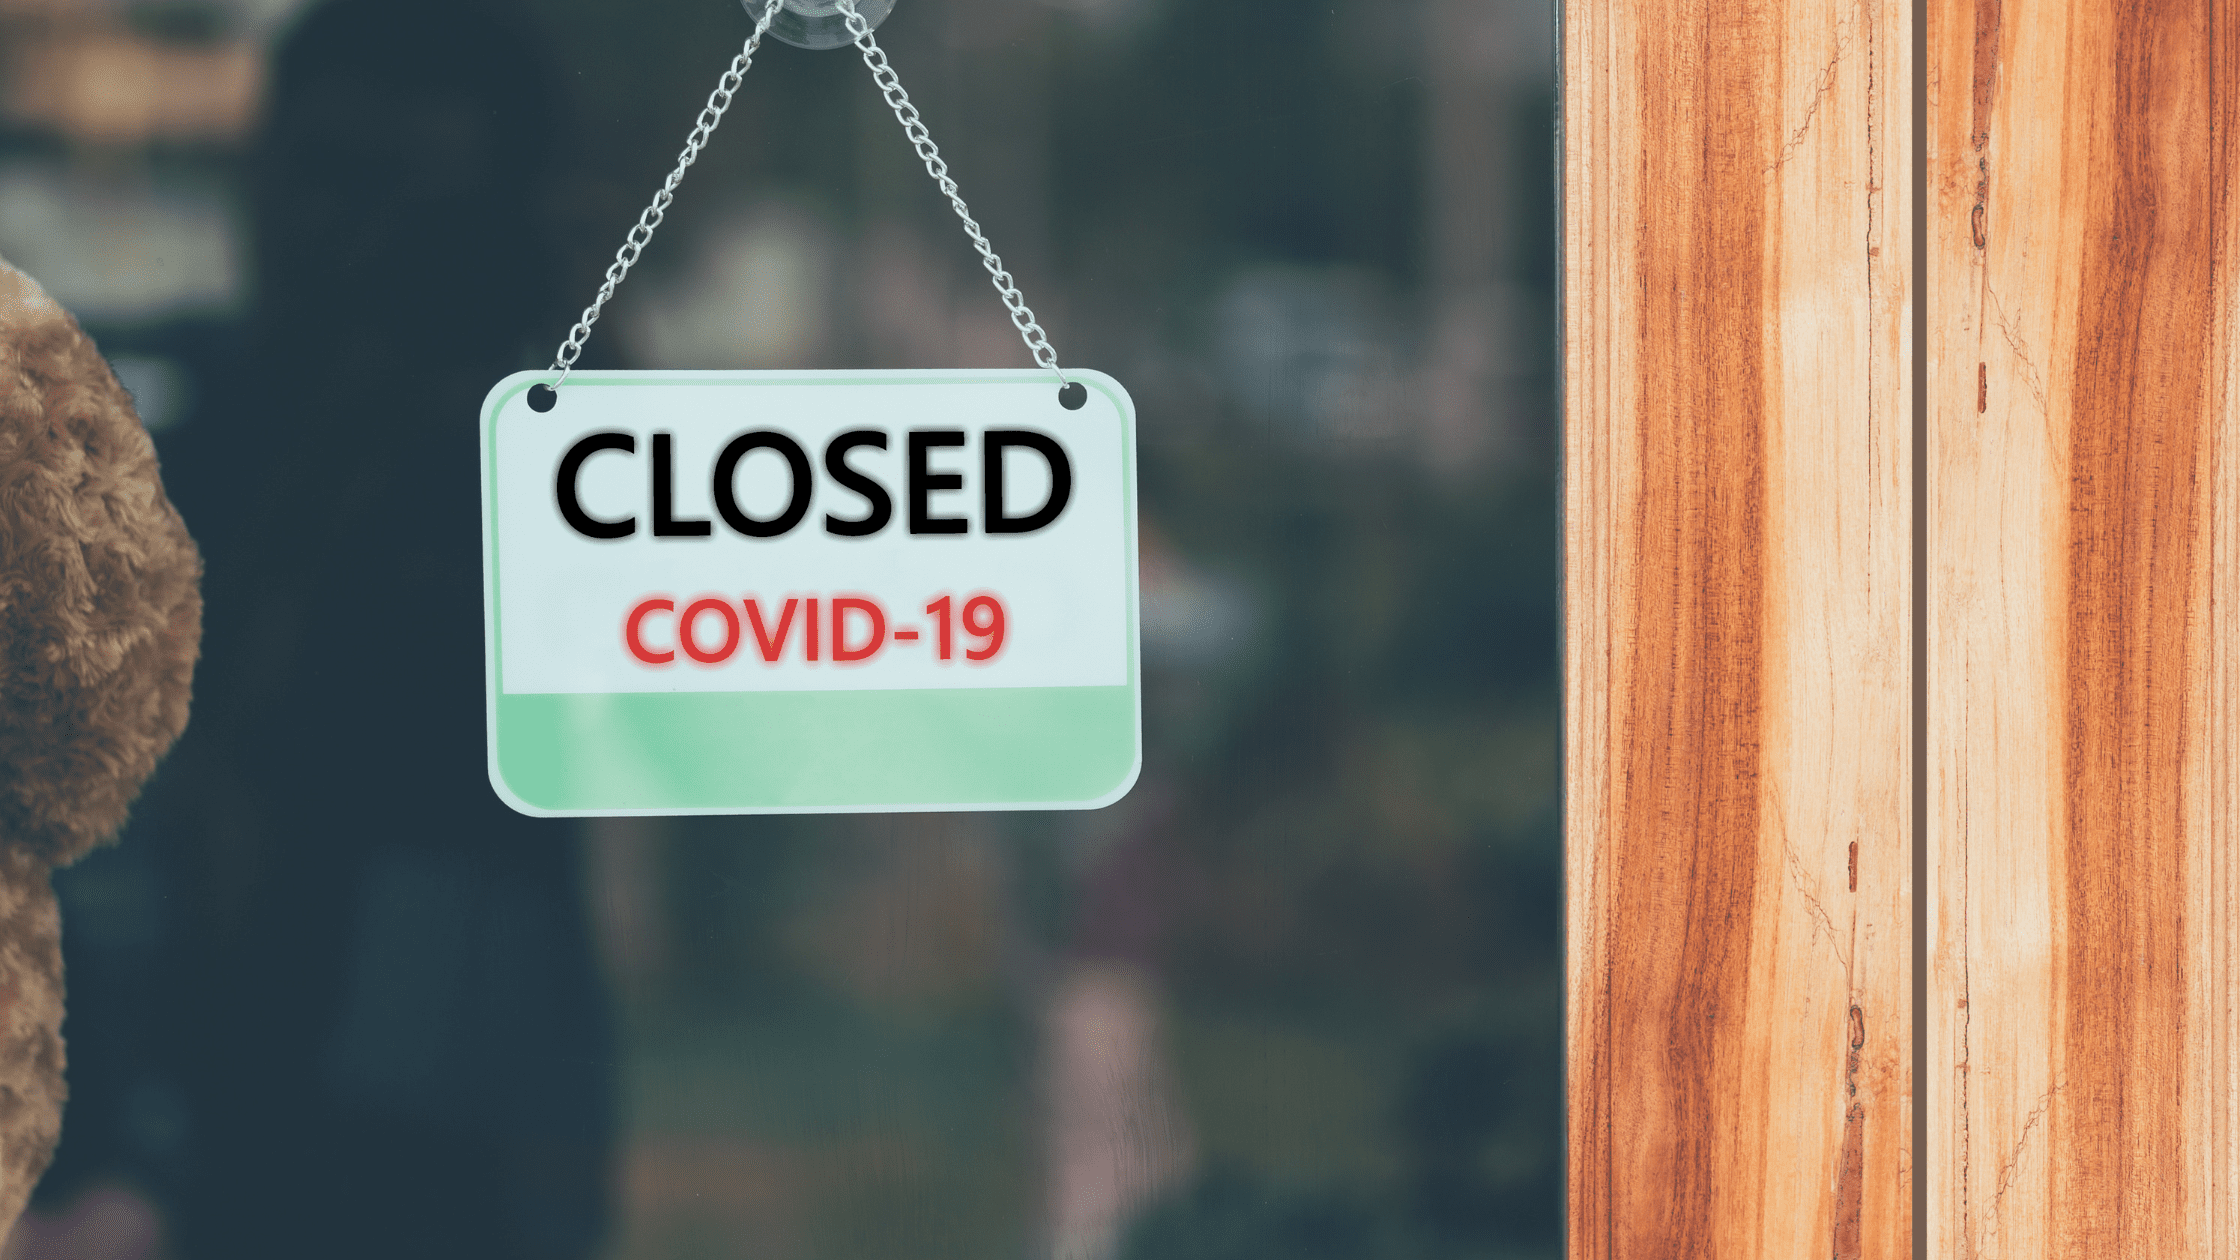 A sign at the window of a Prometric testing center saying "Closed COVID-19".